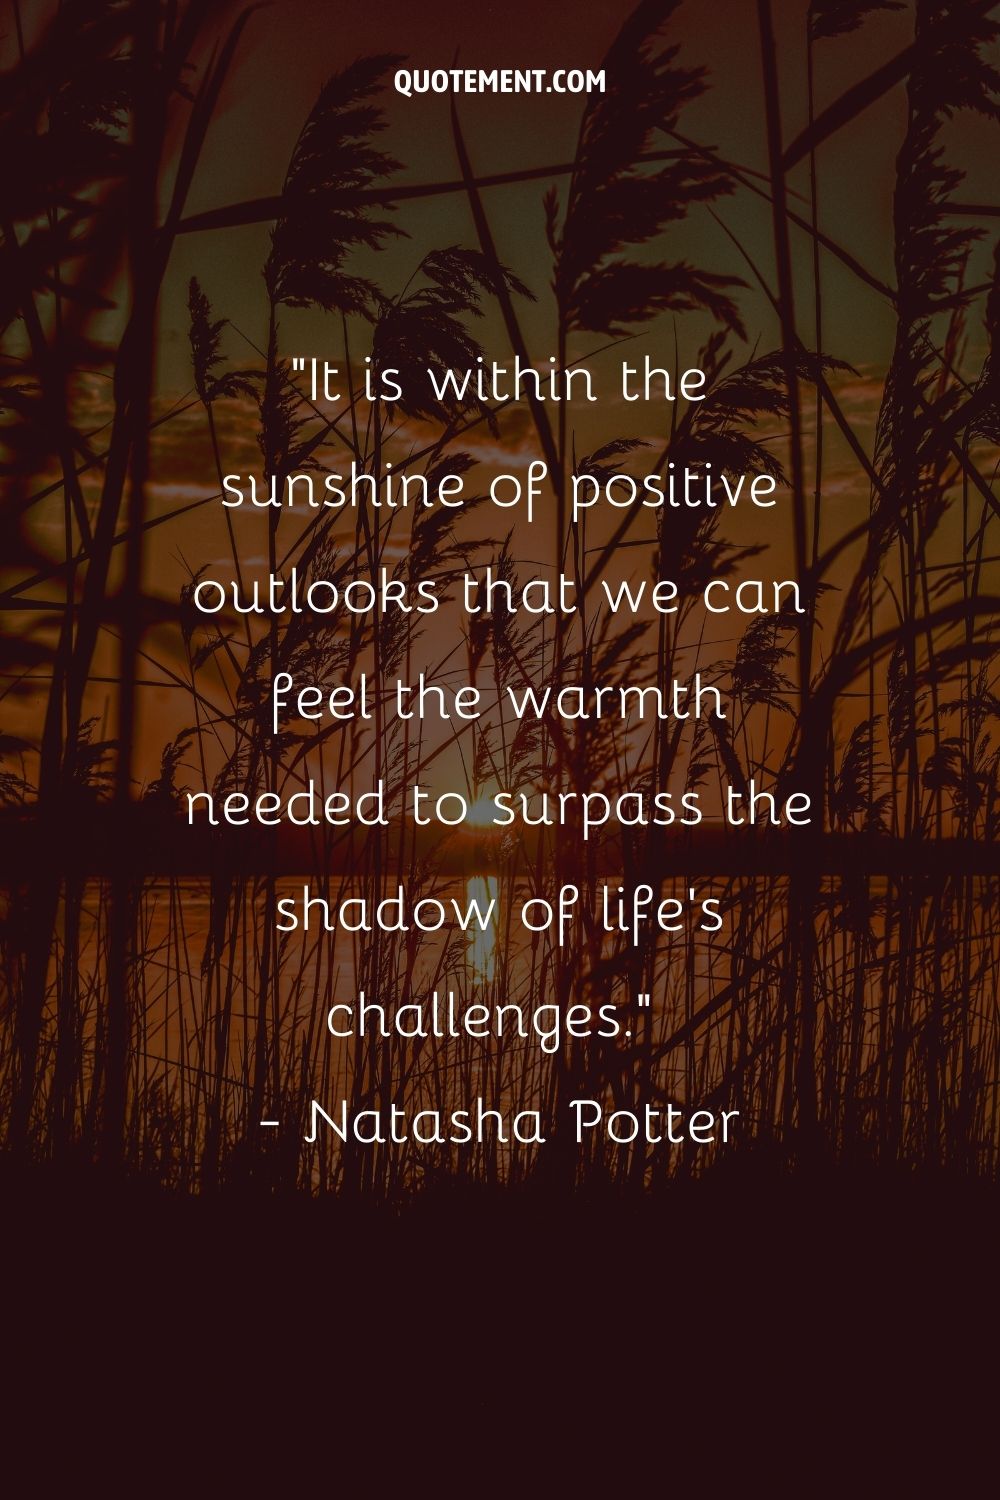 It is within the sunshine of positive outlooks that we can feel the warmth needed to surpass the shadow of life's challenges